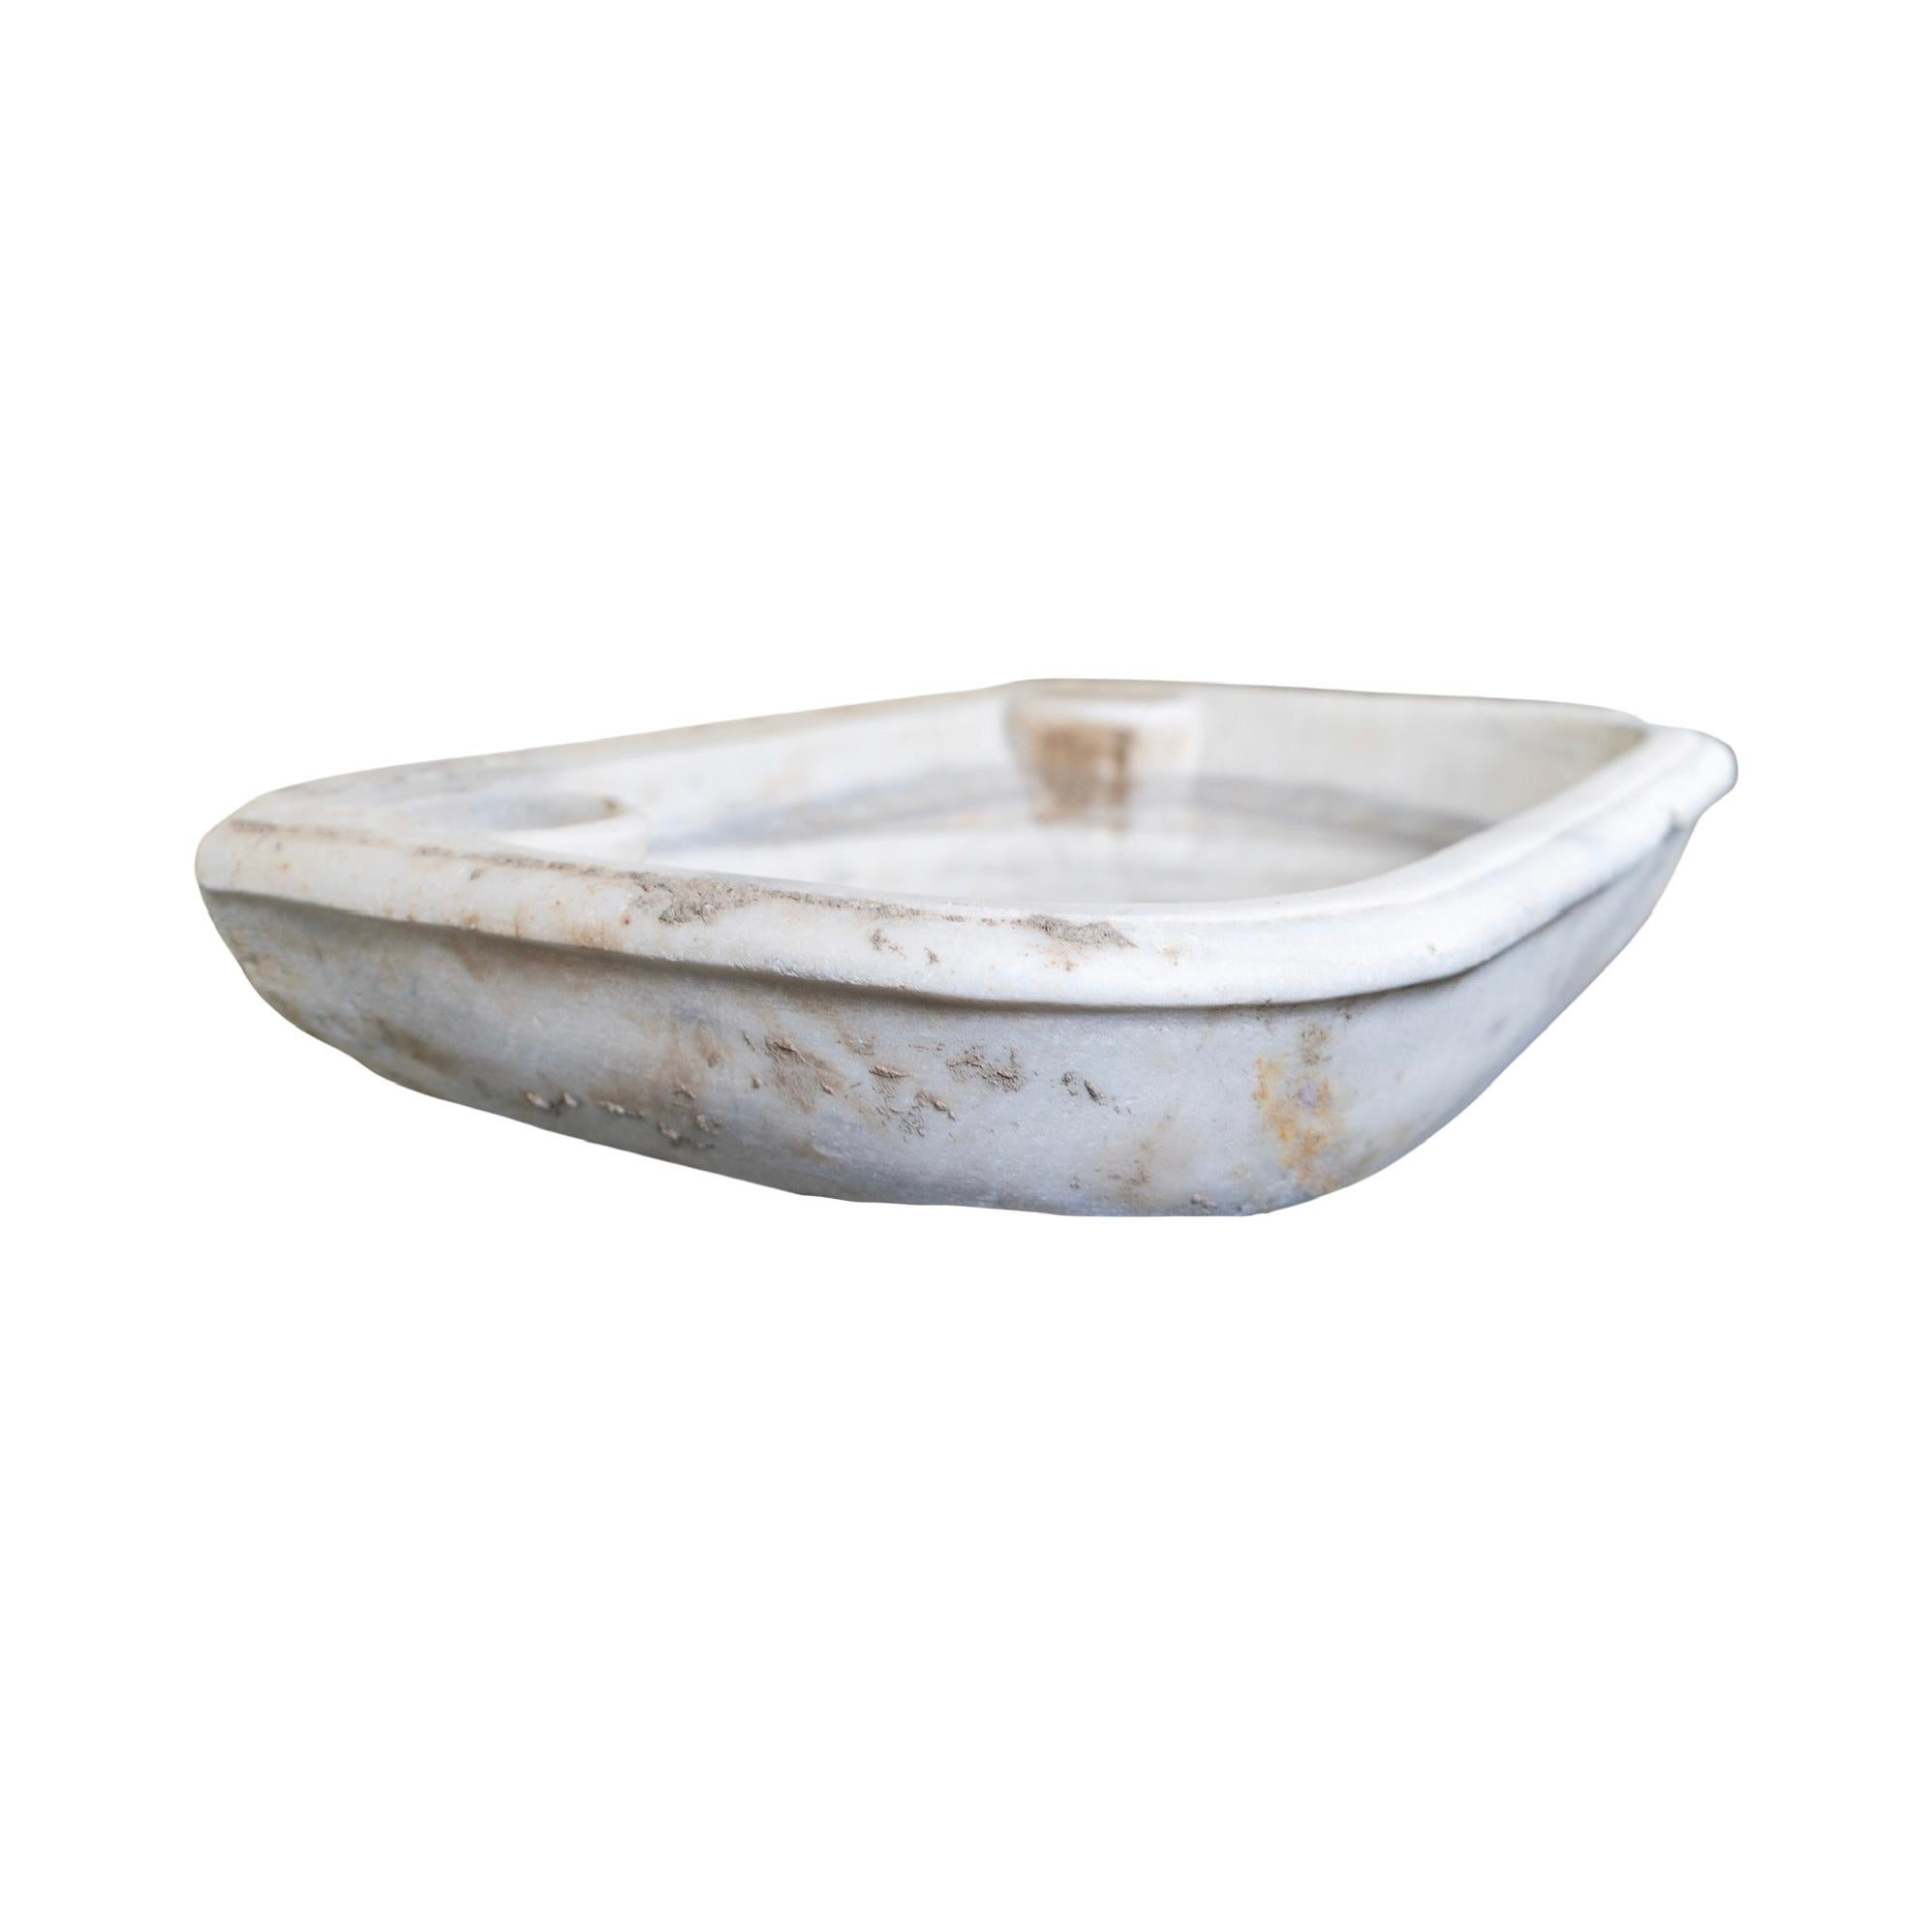 This classic French white marble sink is sure to be the centerpiece of any traditional kitchen, bringing an 18th century charm to your home. The luxurious marble construction will last for generations, providing a timeless look and feel.

 

#8.